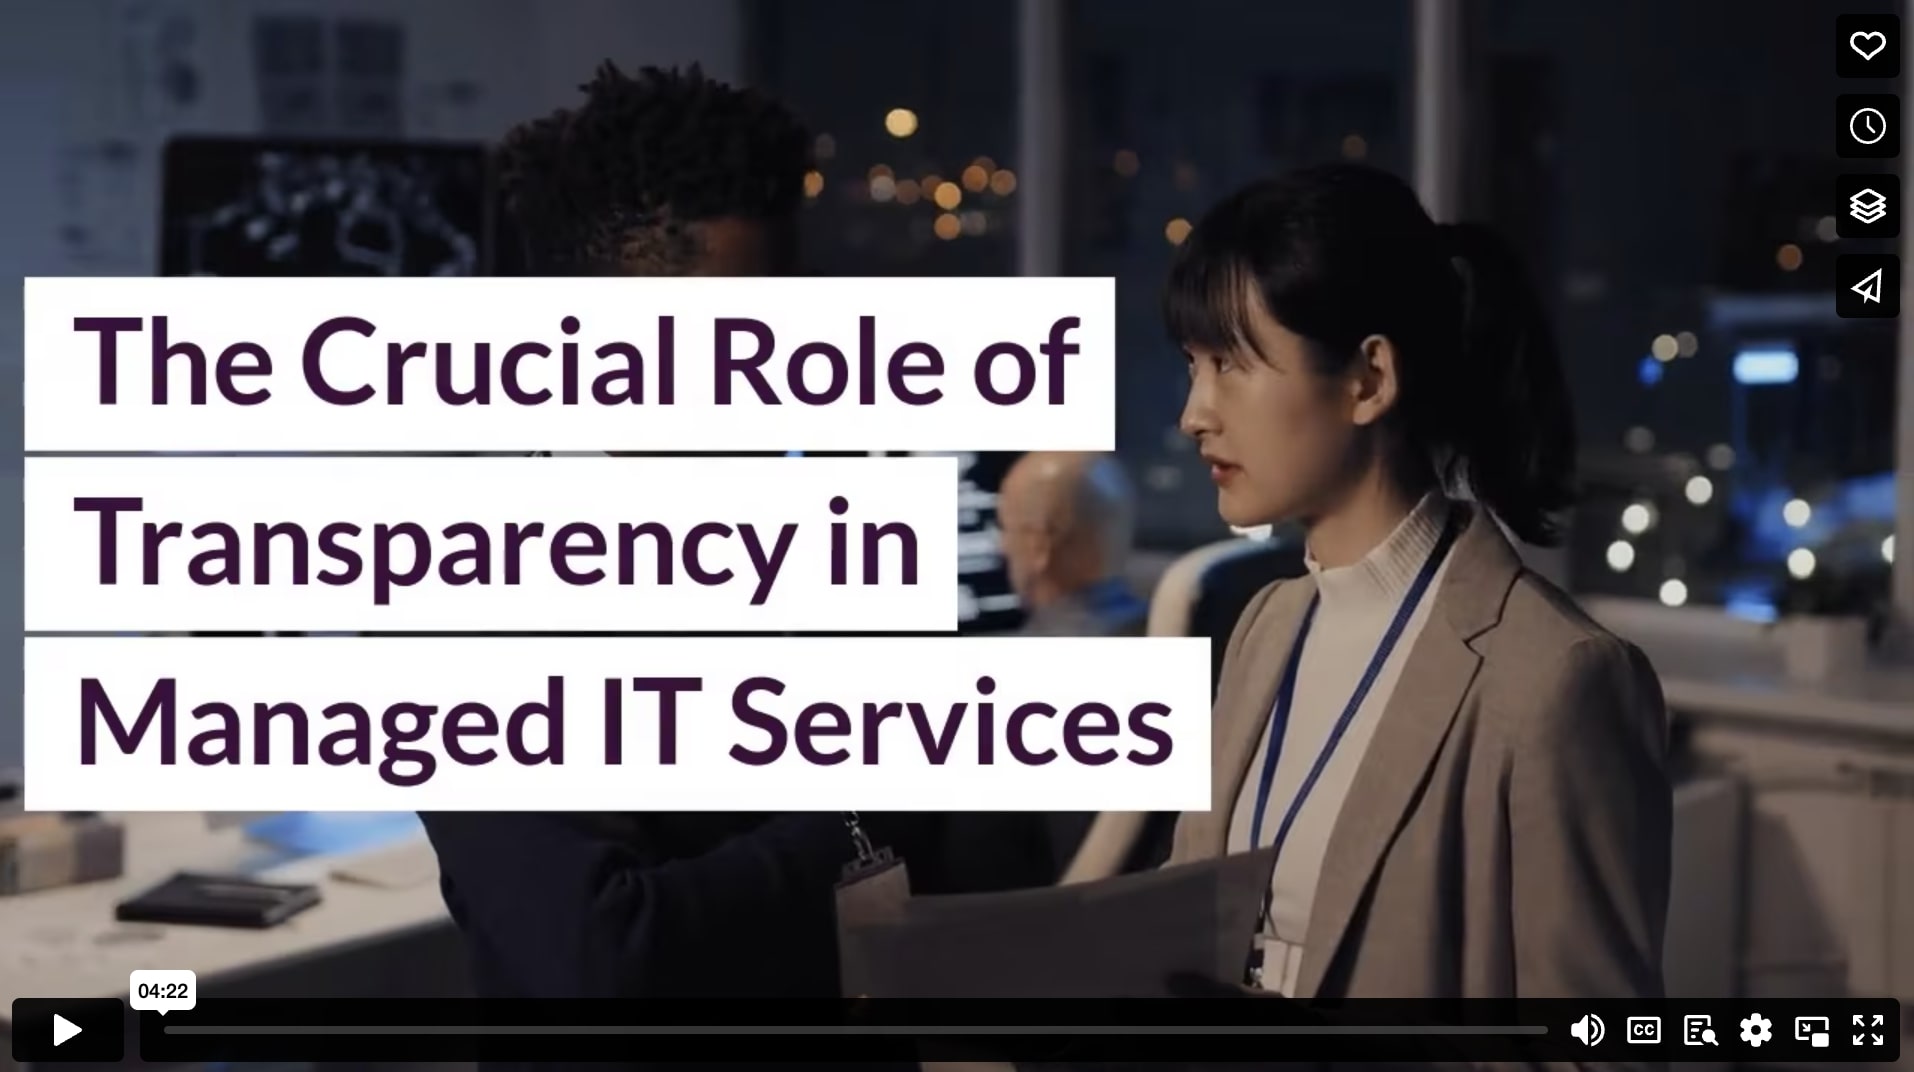 The Crucial Role of Transparency in Managed IT Services